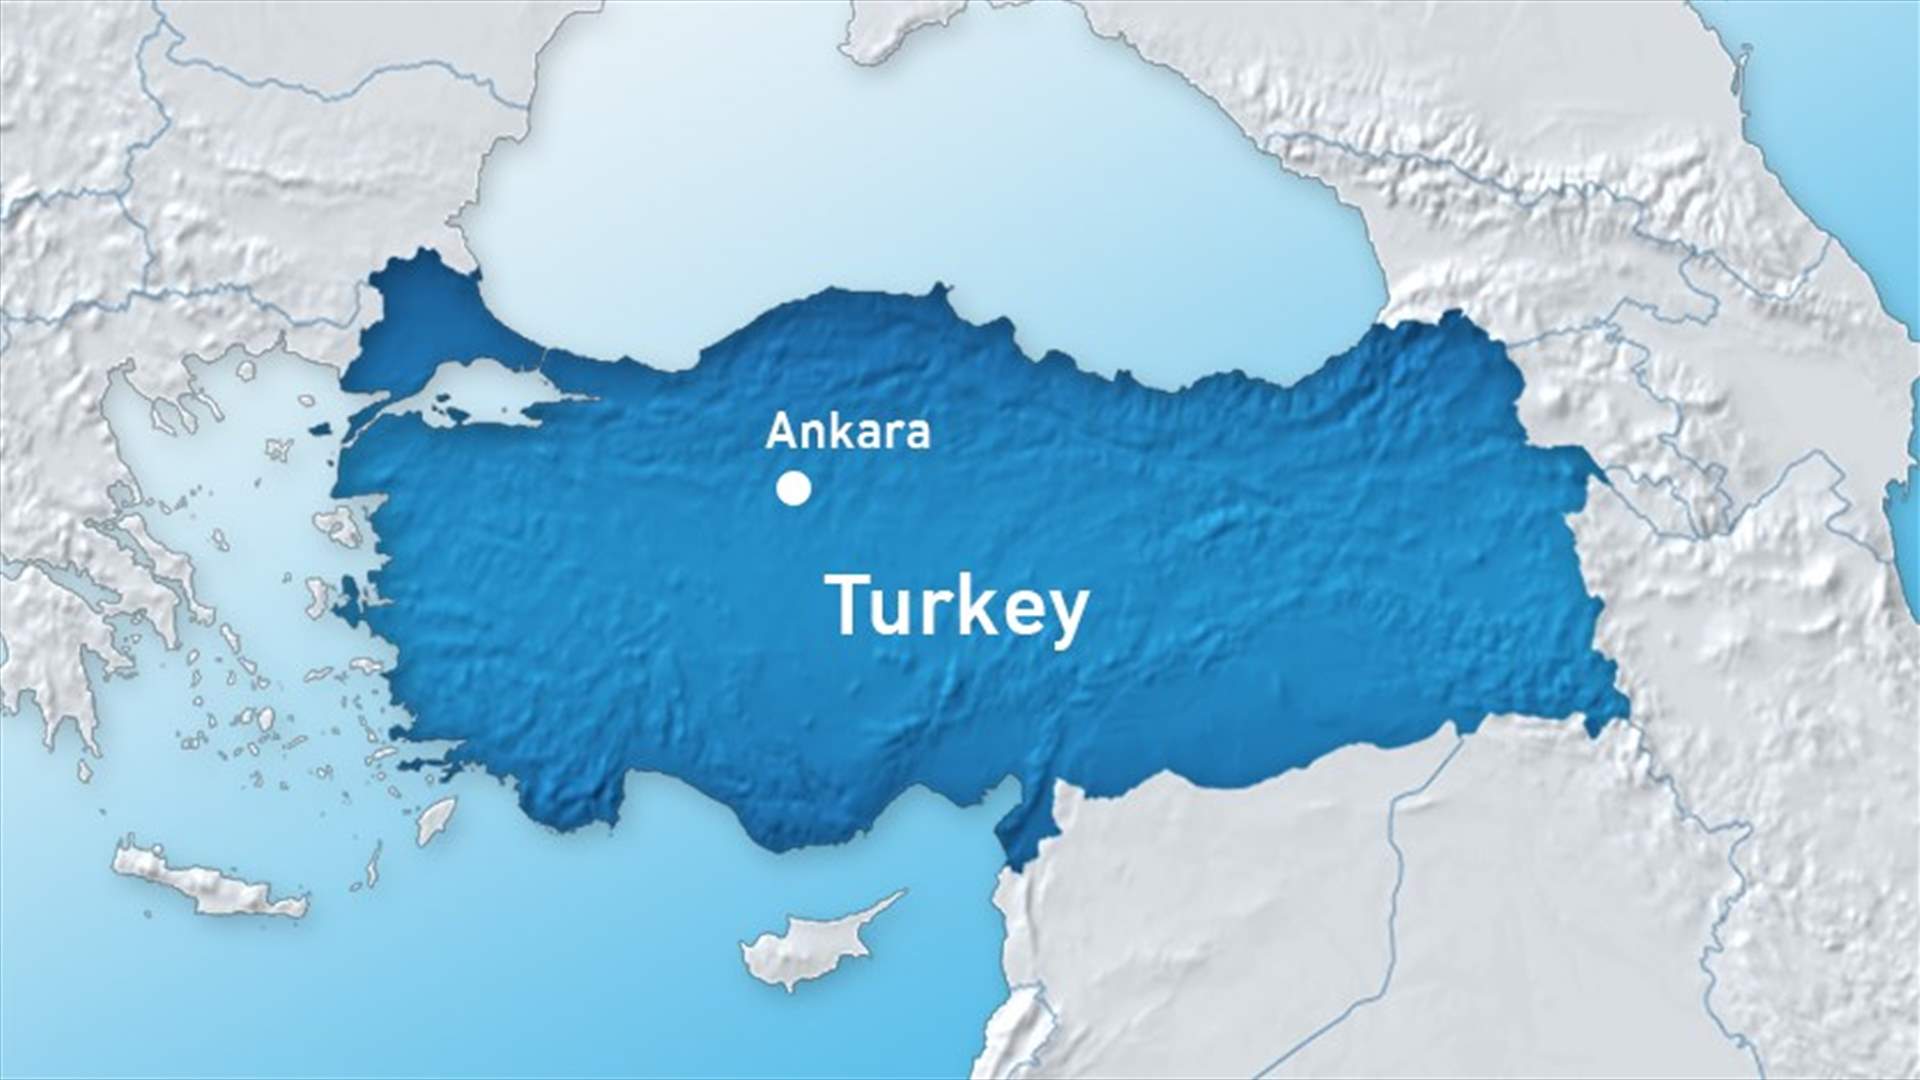 Thirteen workers trapped, 3 dead, in Turkish copper mine after landslide